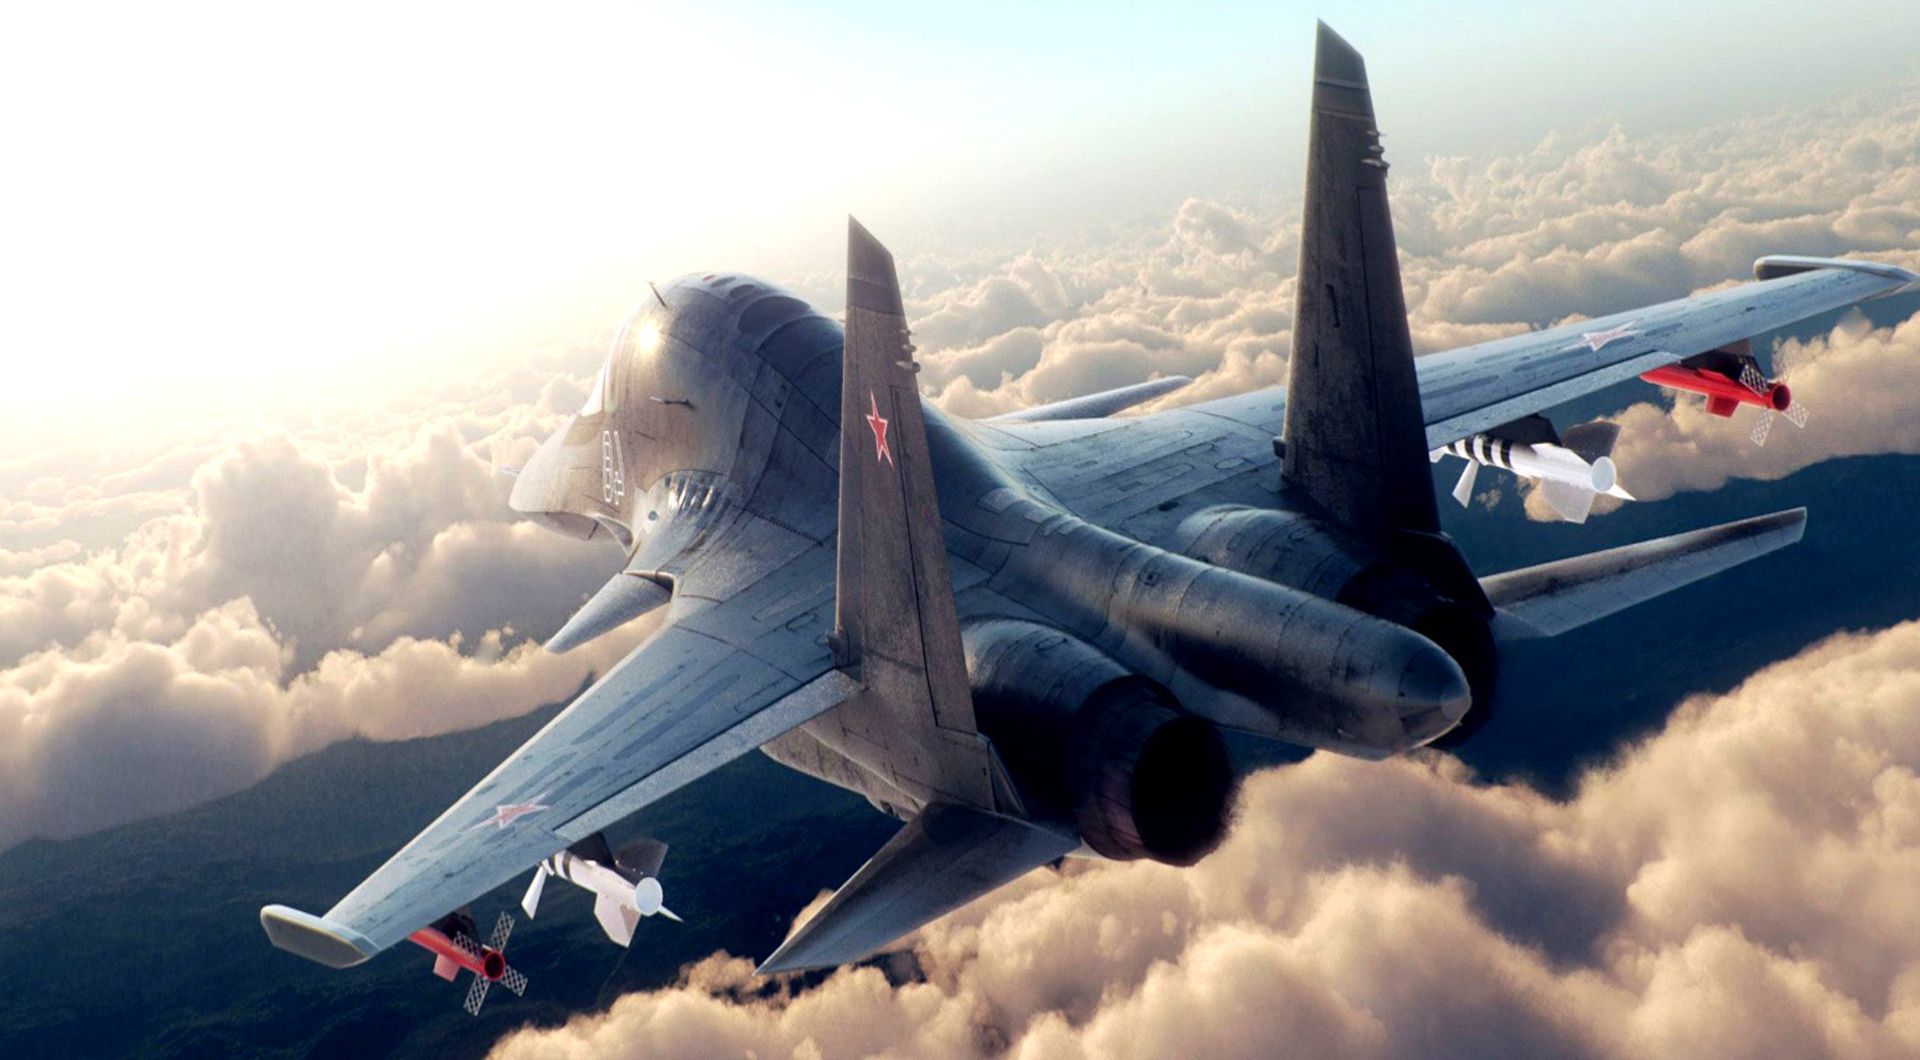 Jet Fighter Military Aircraft HD Wallpapers in HD